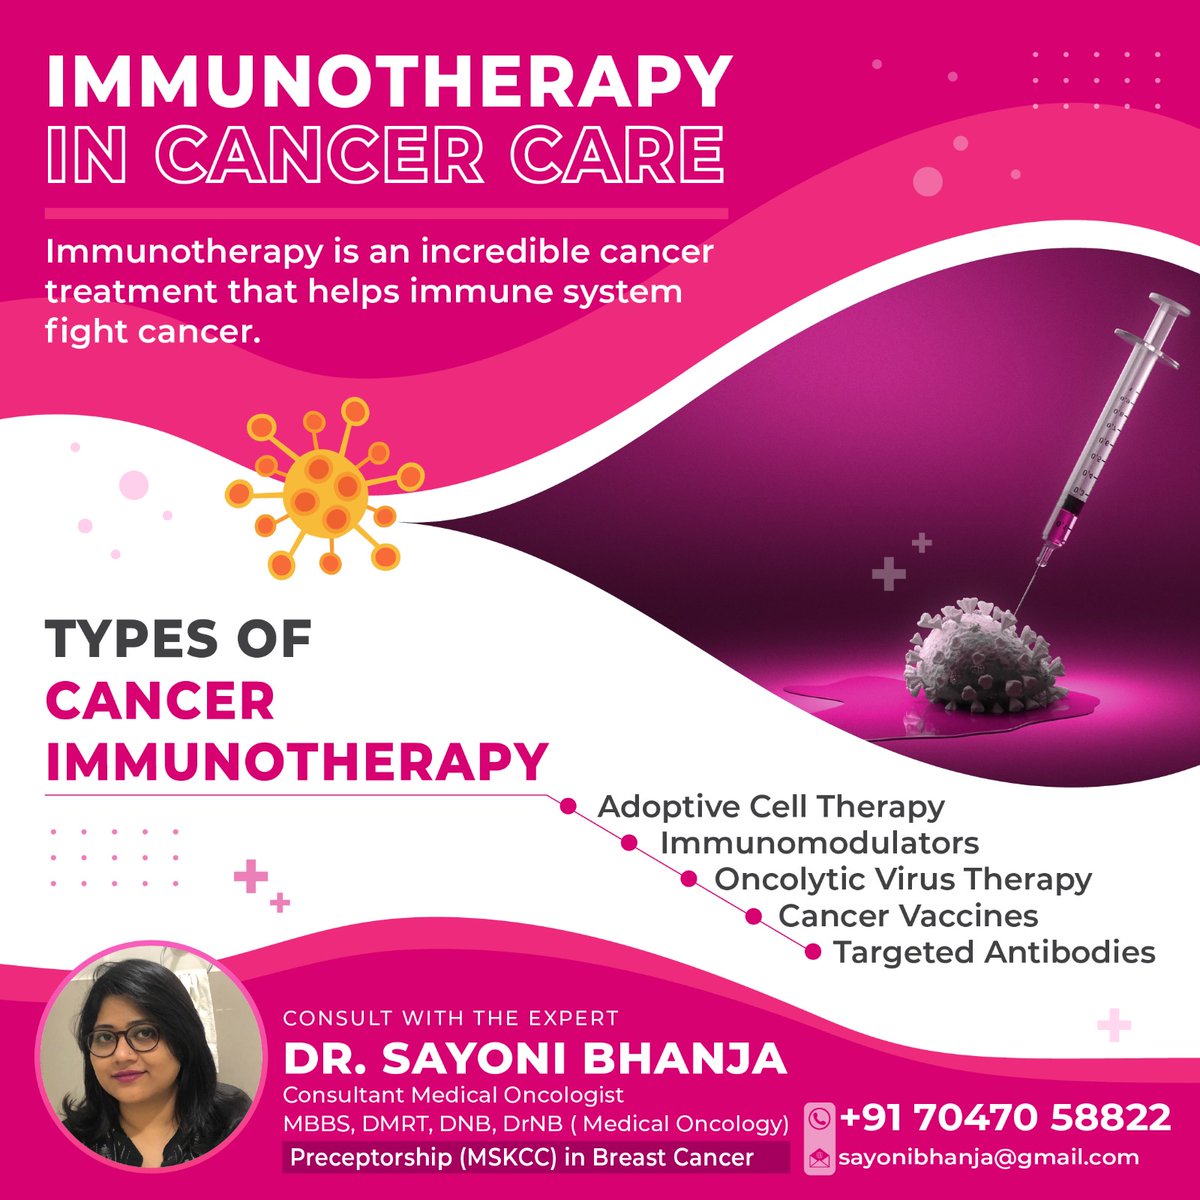 Immunotherapy for cancer uses your body's immune system to find and destroy cancerous cells. 
#Immunotherapy #CancerCell #Kolkata #MedicalOncologist #CancerCare